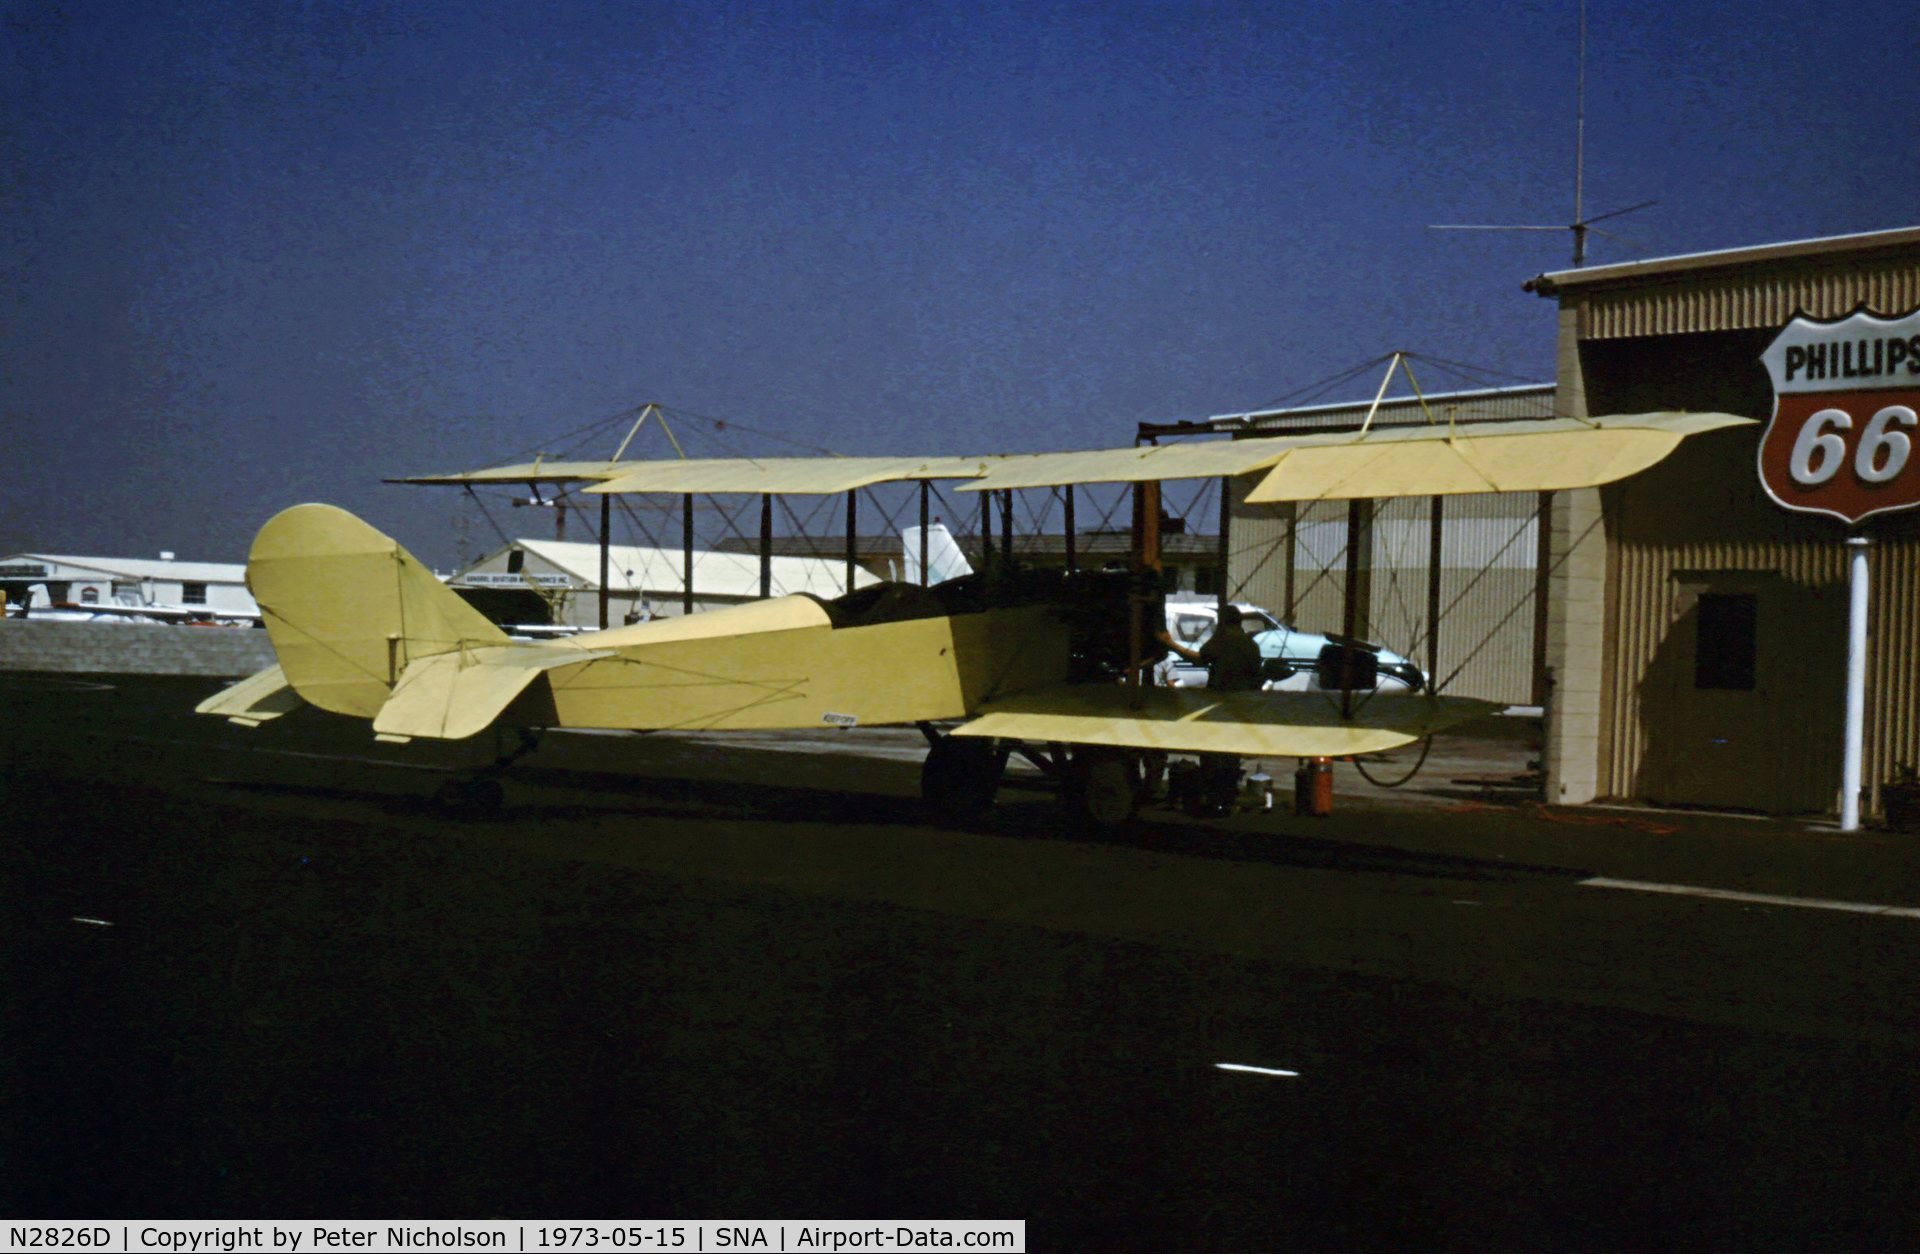 N2826D, 1917 Standard J-1 C/N 1598, Standard J-1 of the Tallmantz Collection as seen at Santa Ana in May 1973.